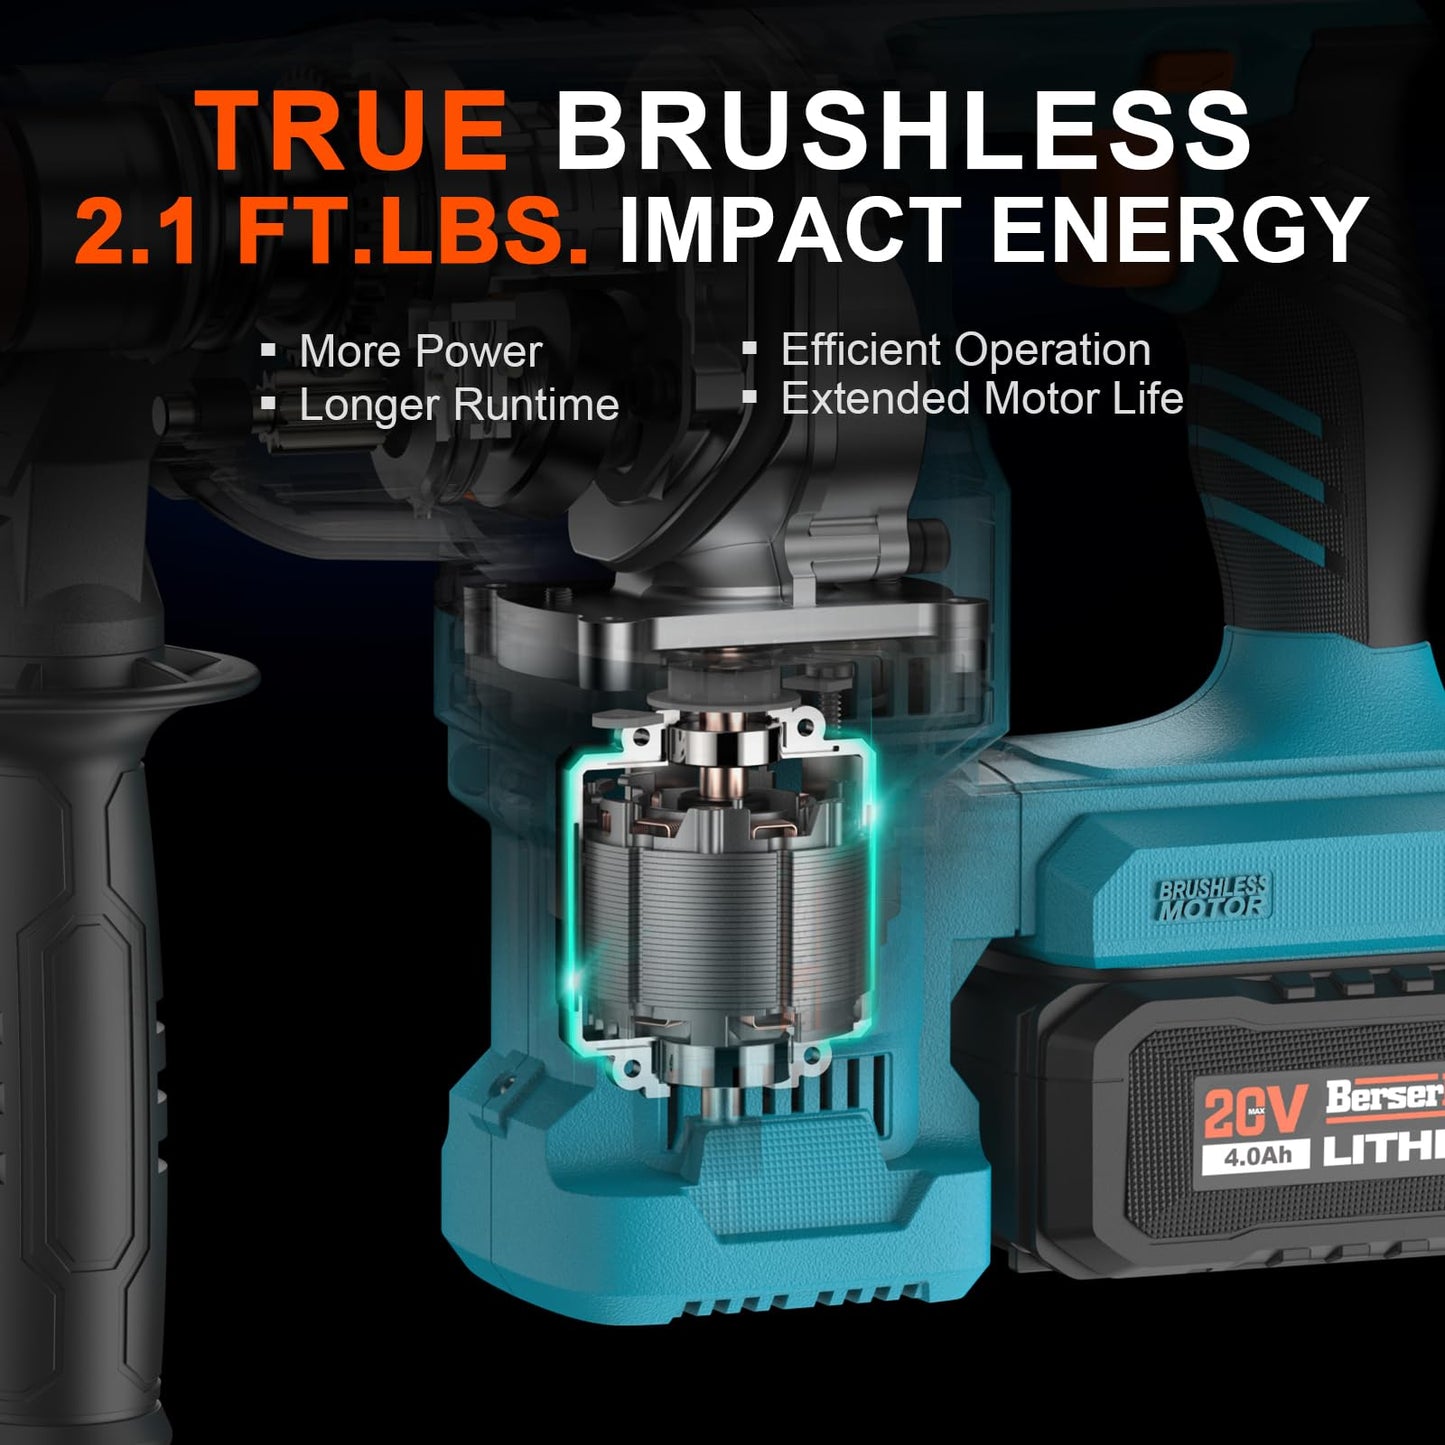 Berserker 20V Cordless 1-1/8" Rotary Hammer Drill SDS-Plus Brushless Motor with Safety Clutch, 4.0Ah Lithium-Ion Battery Powered, 3.0A Fast Charger,